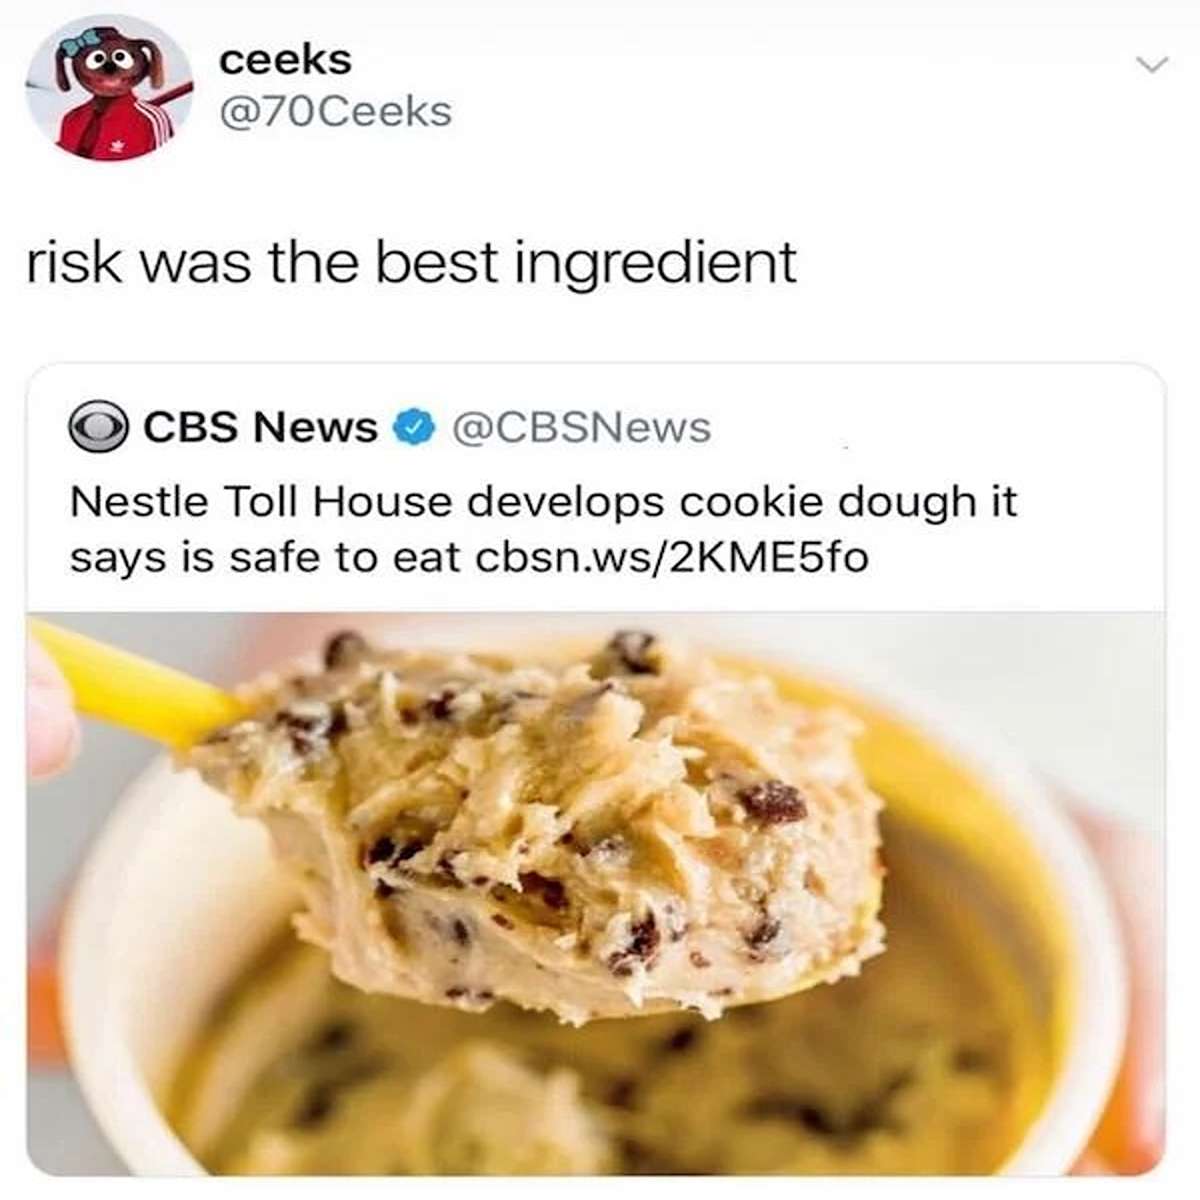 funny tweets and memes - ice cream - ceeks risk was the best ingredient Cbs News Nestle Toll House develops cookie dough it says is safe to eat cbsn.ws2KME5fo